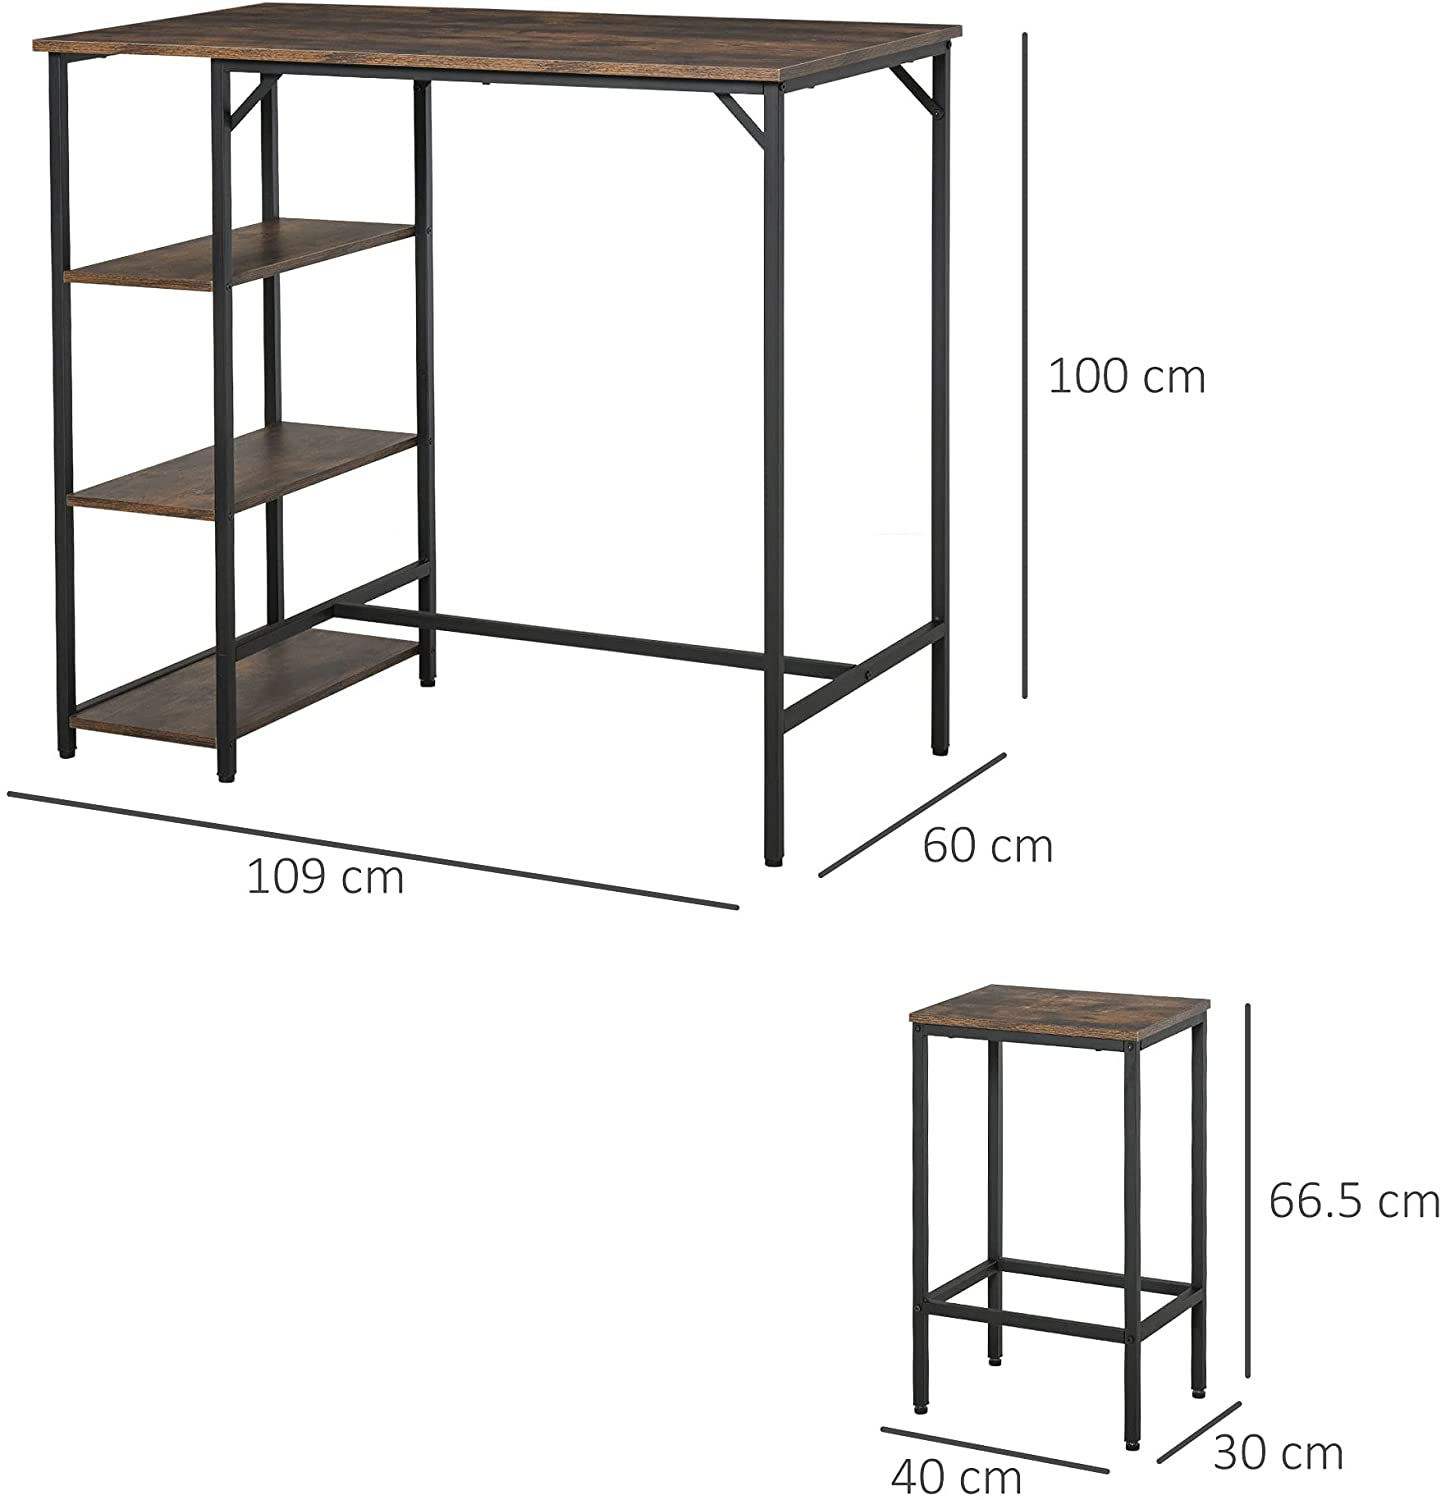 Rena Industrial Bar Height Dining Table Set with 2 Stools & Side Shelf